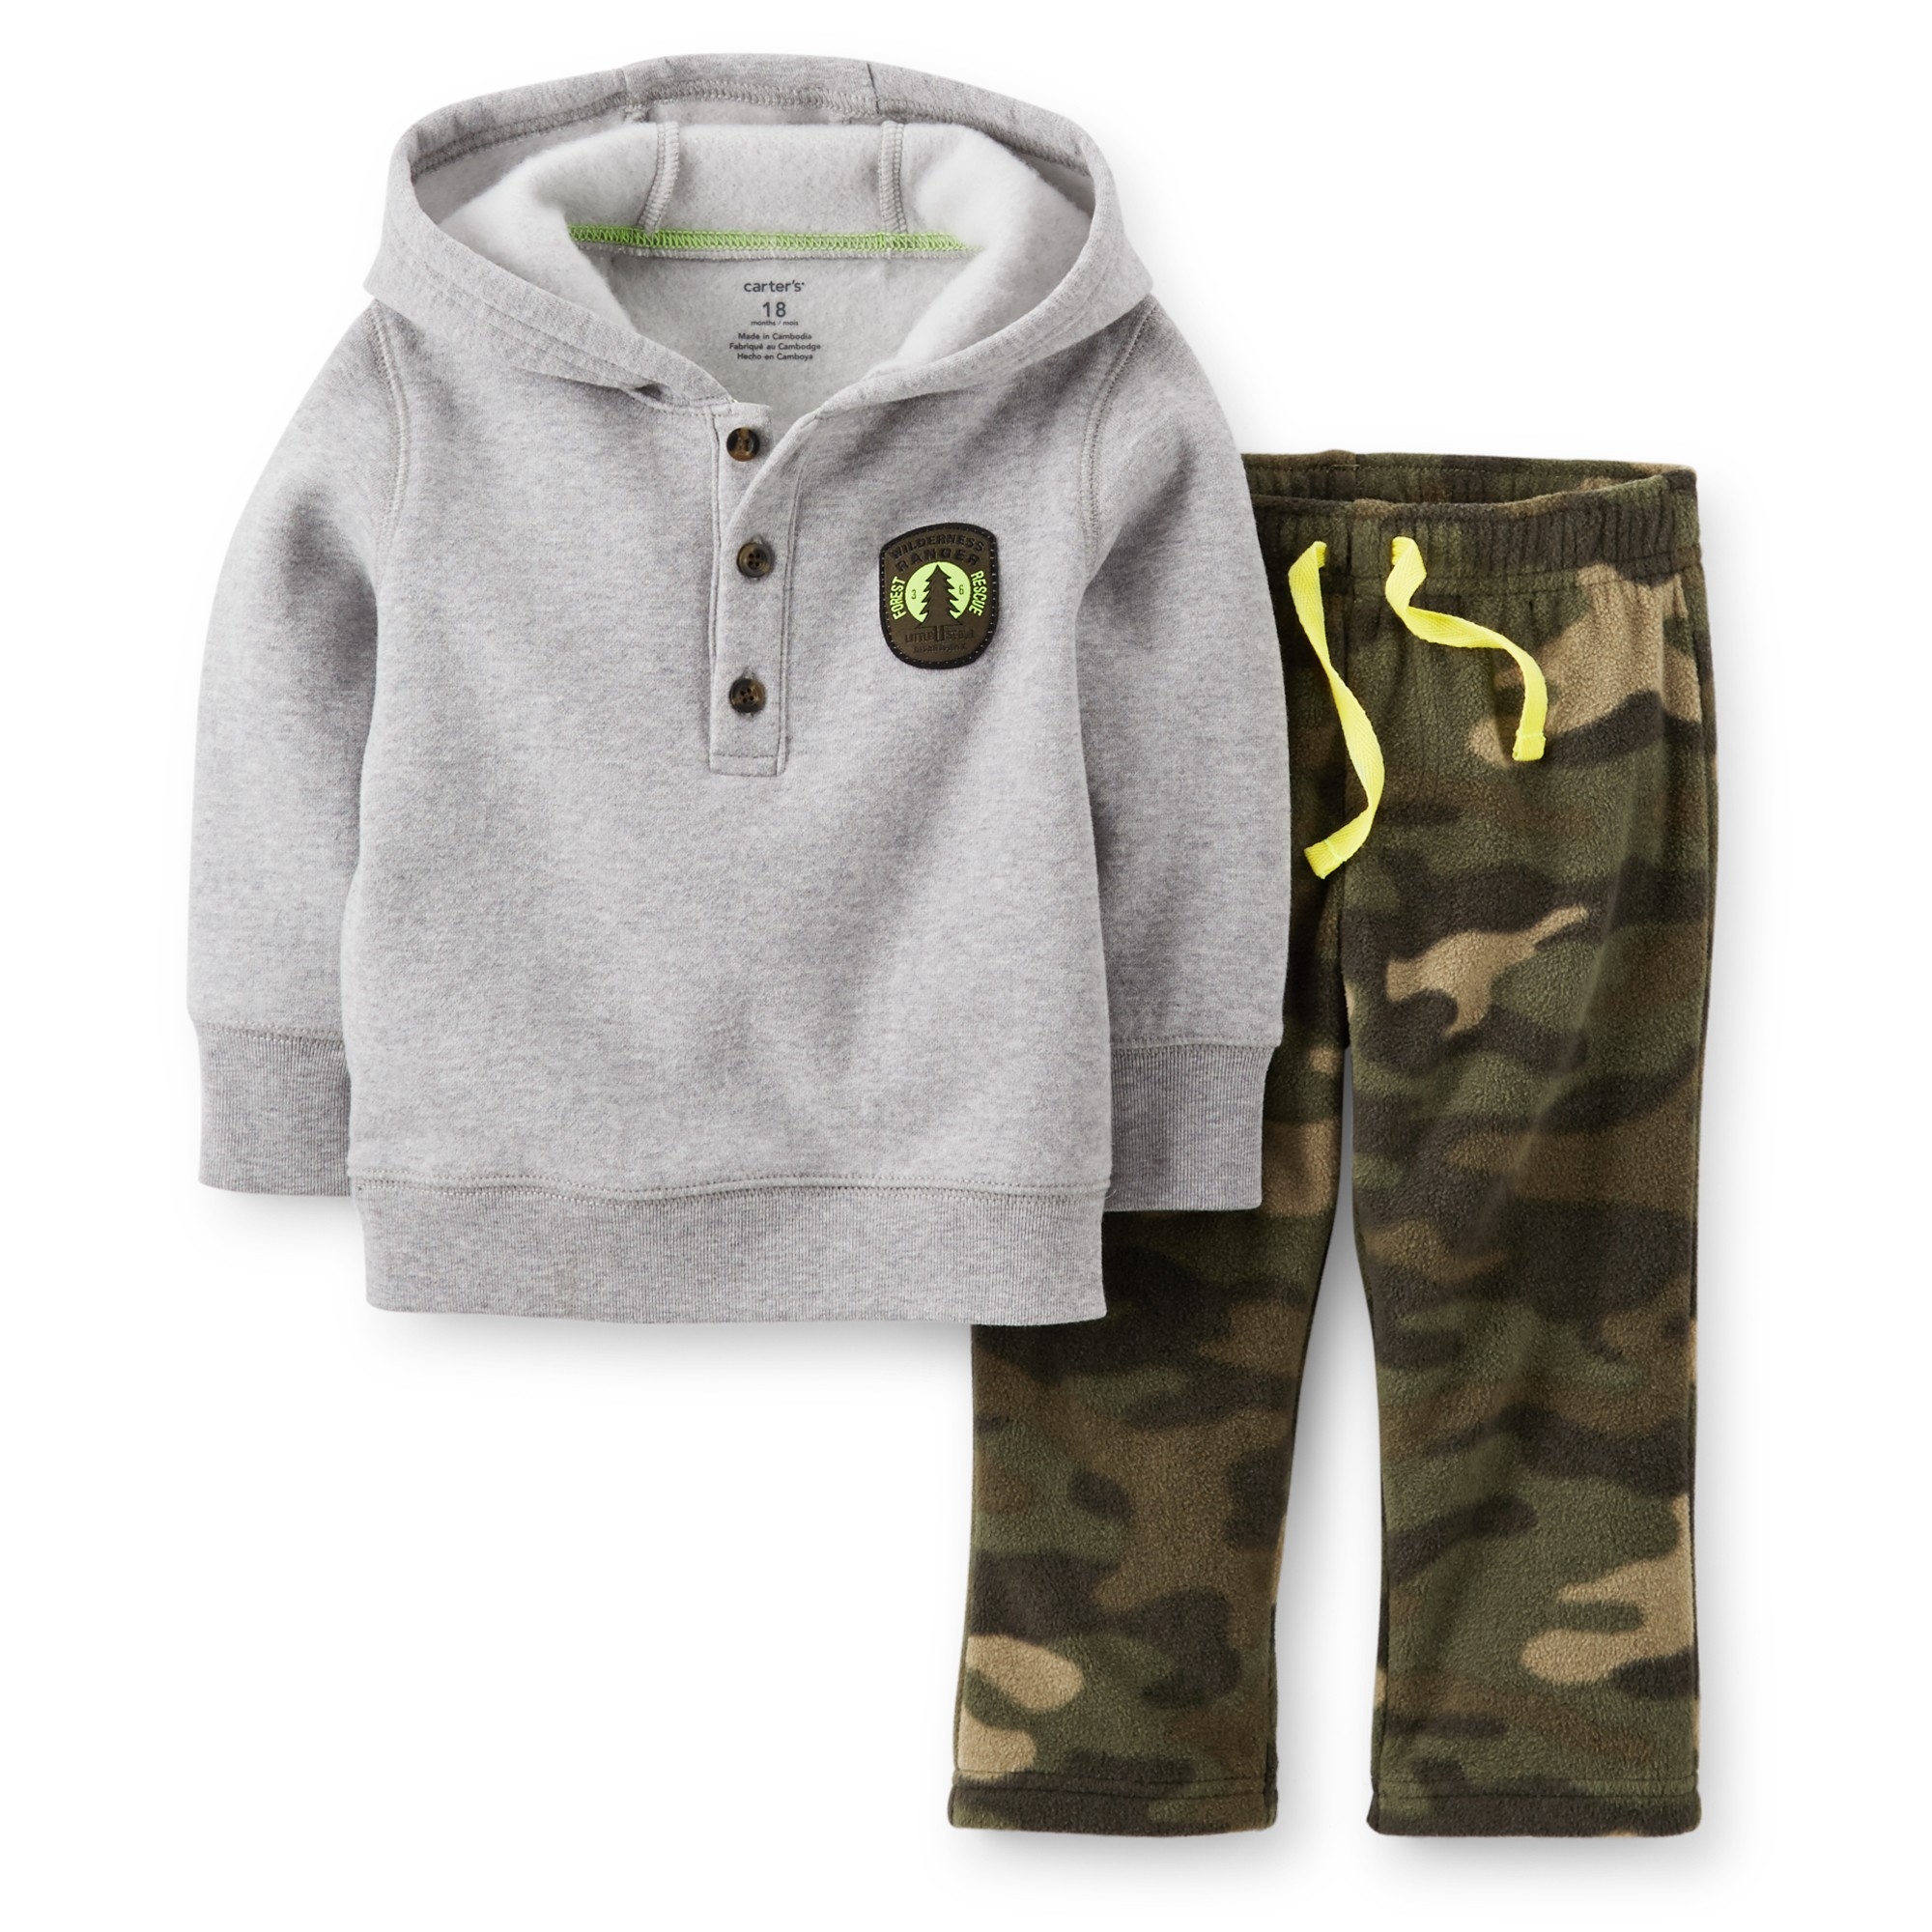 Carter's Toddler Boy's Hoodie & Sweatpants - Camouflage